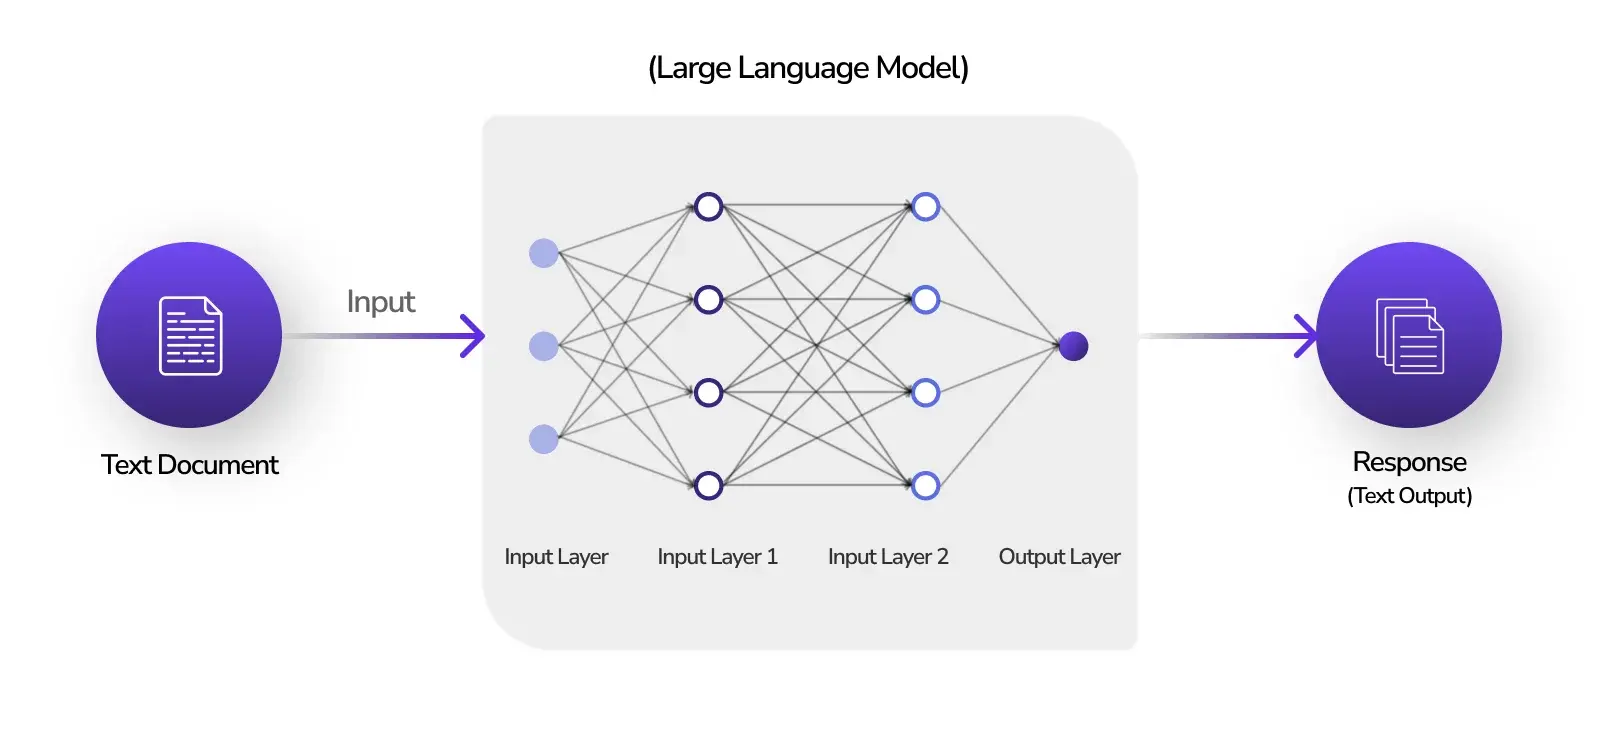 Predicting Expected Responses with Large Language Models